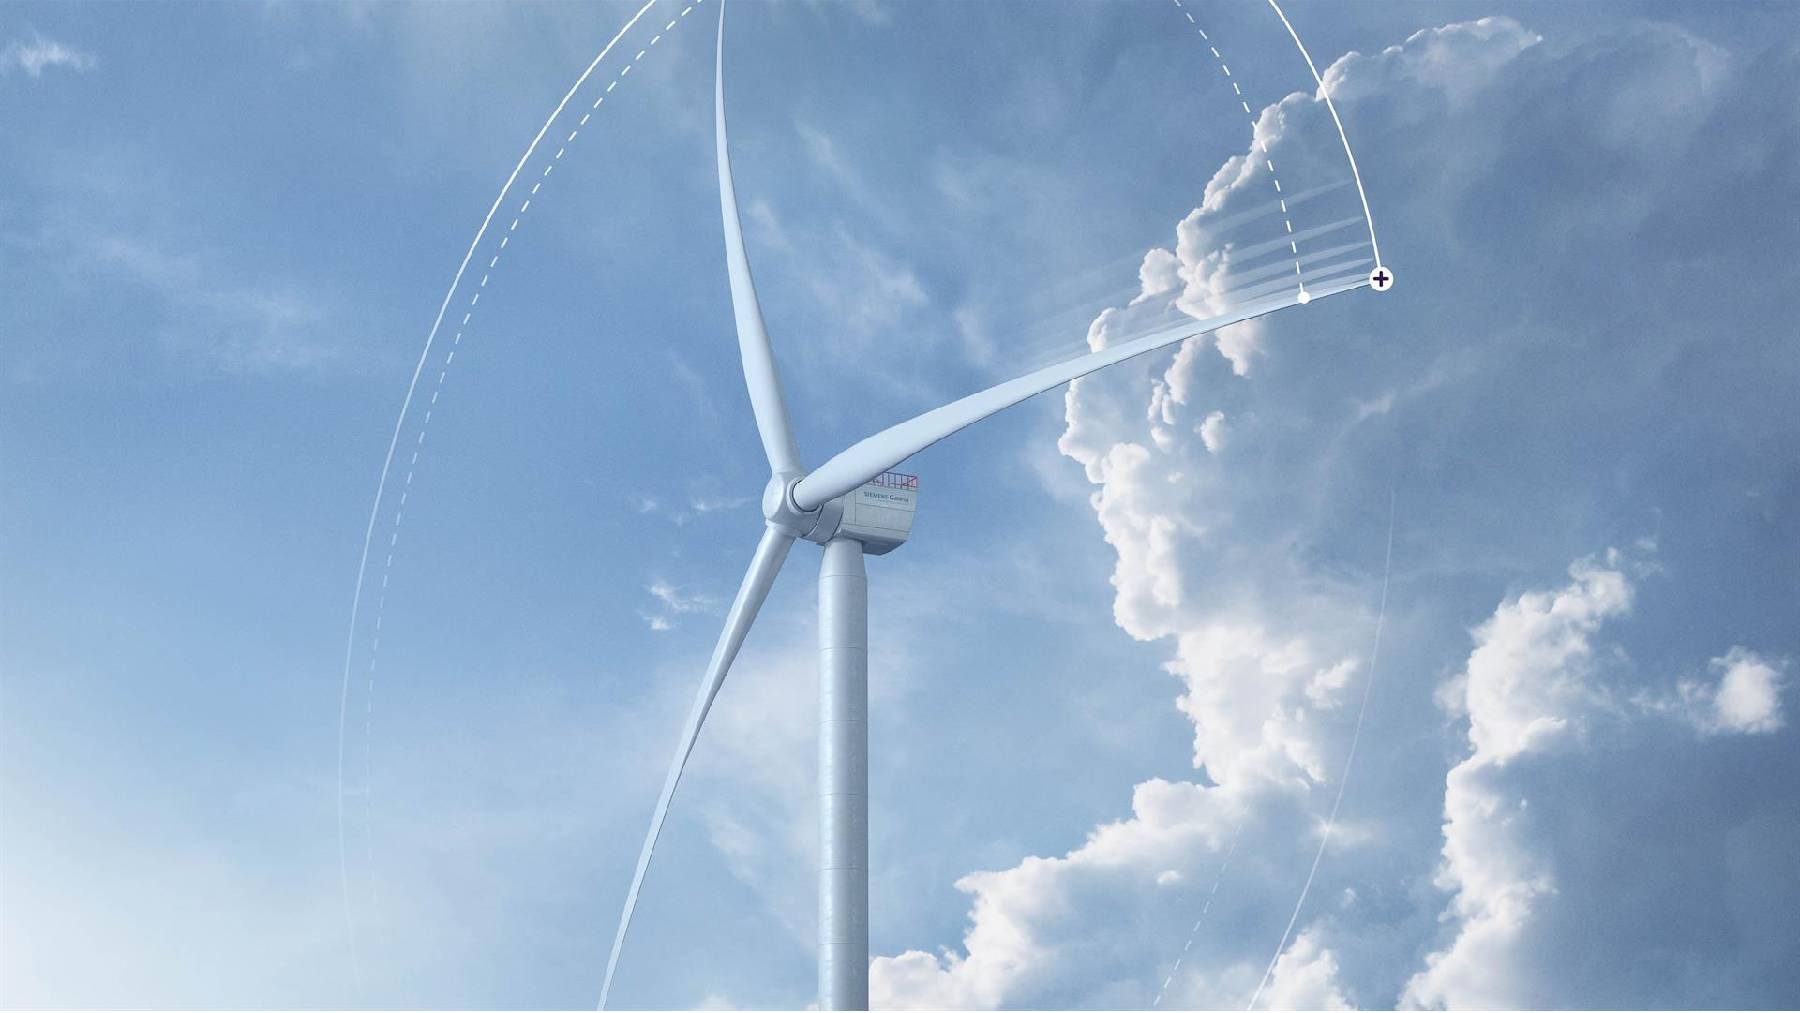 Siemens Gamesa has entered into an agreement with Vattenfall to supply 3.6GW in the UK